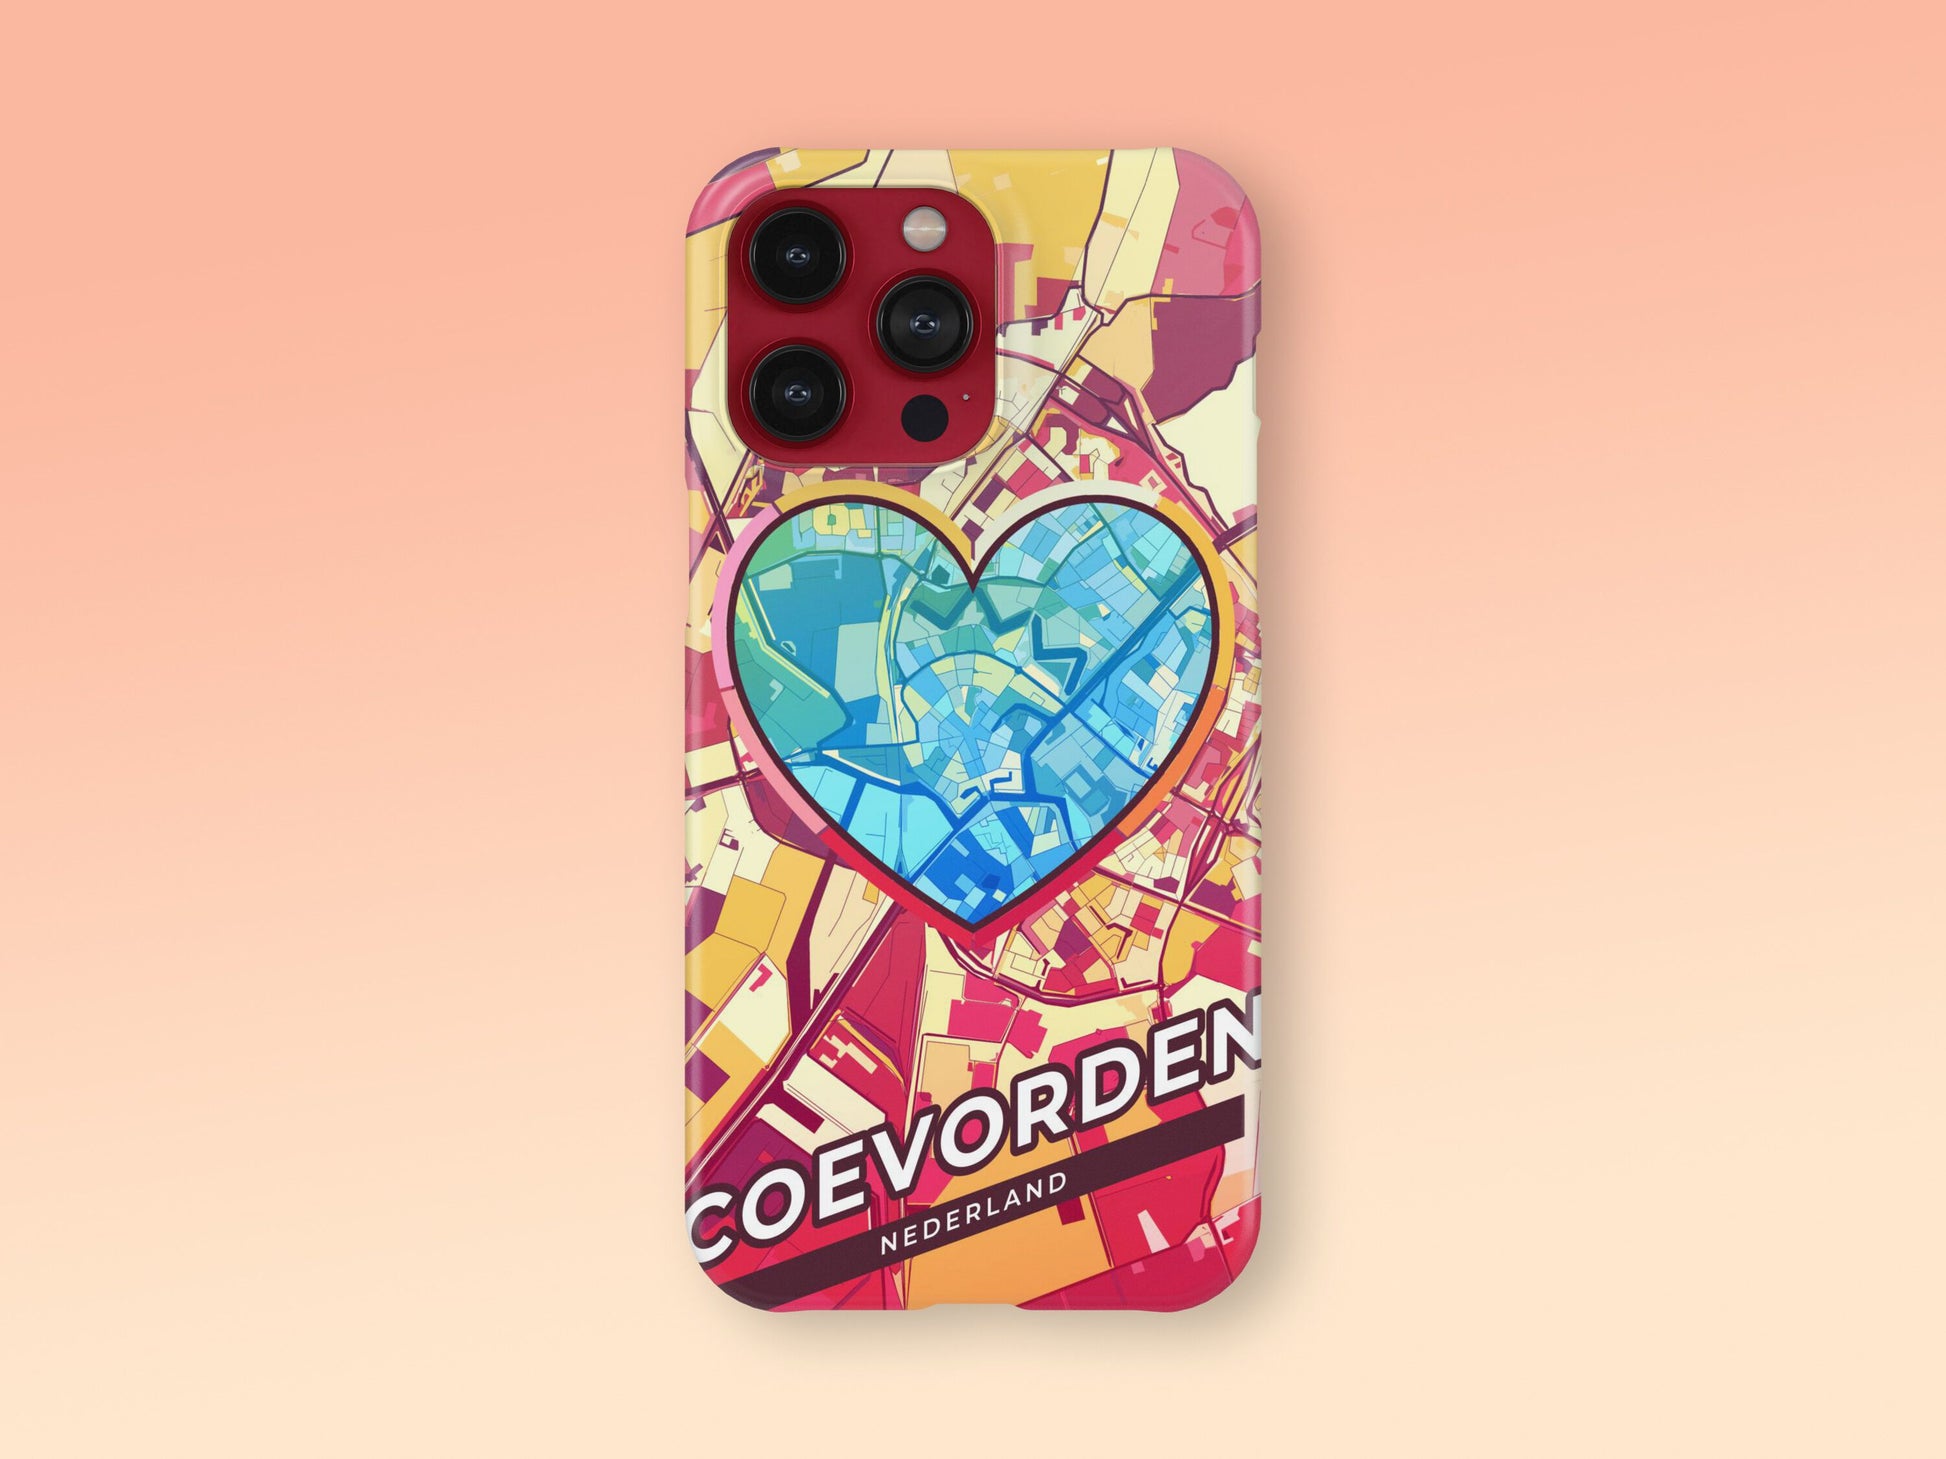 Coevorden Netherlands slim phone case with colorful icon. Birthday, wedding or housewarming gift. Couple match cases. 2